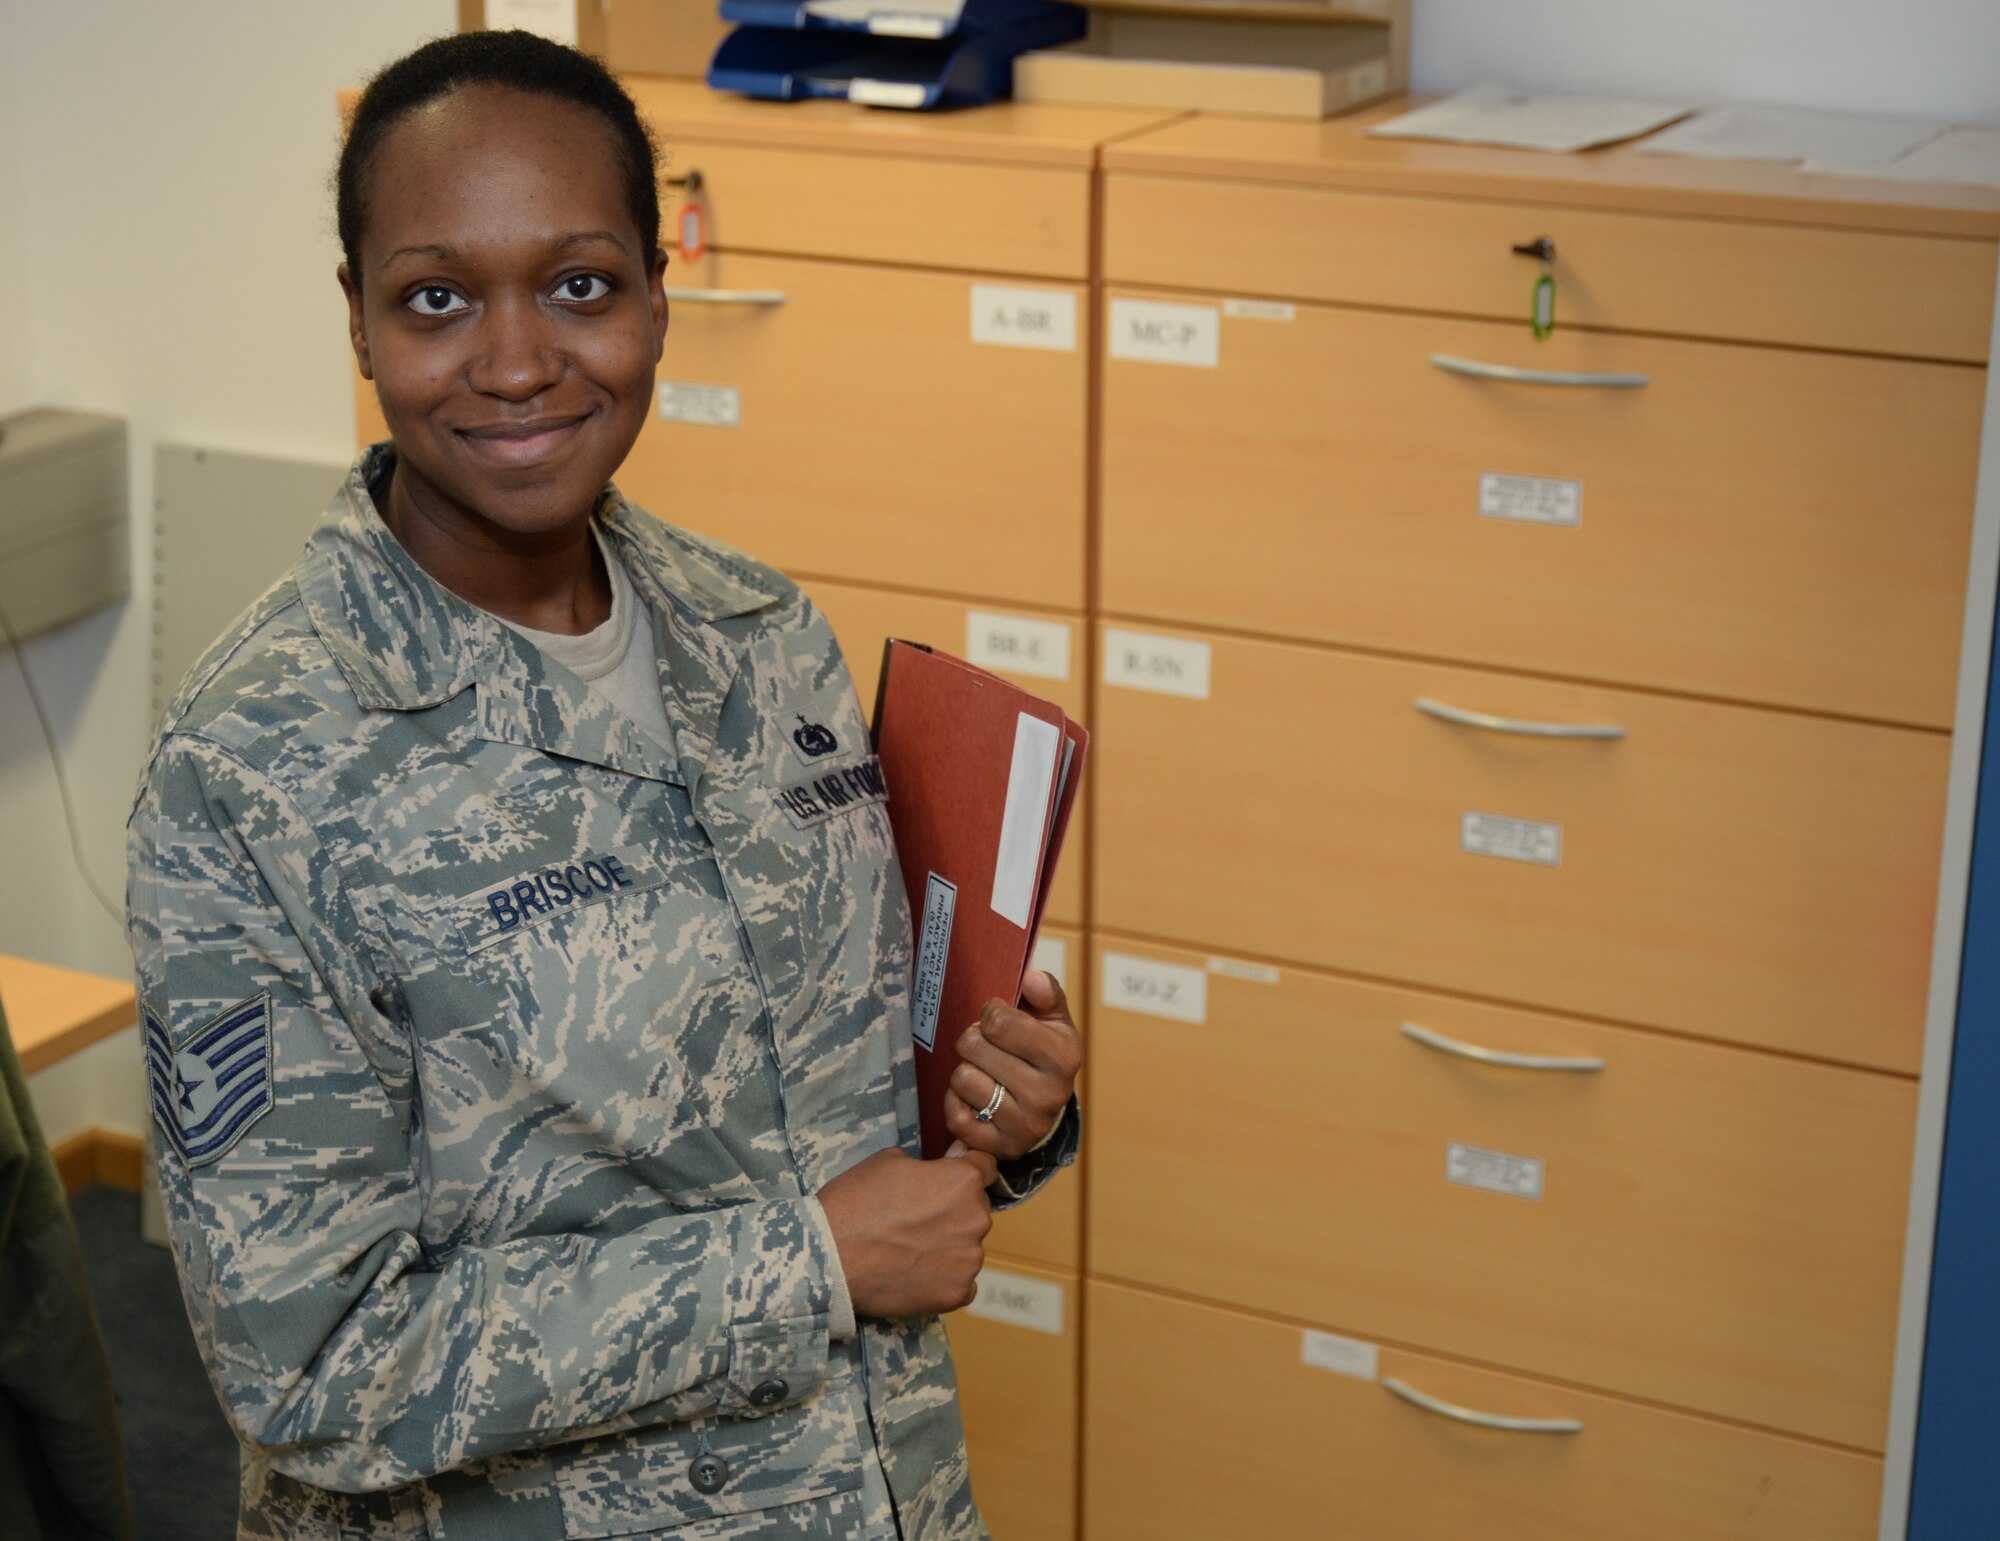 SPANGDAHLEM AIR BASE, Germany -- Tech. Sgt. Tena Briscoe, unit deployment manager of 606th Air Control Squadron of Baltimore, Md., poses next to her file cabinet at her squadron's headquarters Jan. 13, 2014. As UDM, Briscoe ensures each individual Airman is prepared for pending deployments and for their eventual return back to their home station. (U.S. Air Force illustration by Staff Sgt. Joe W. McFadden / Released)